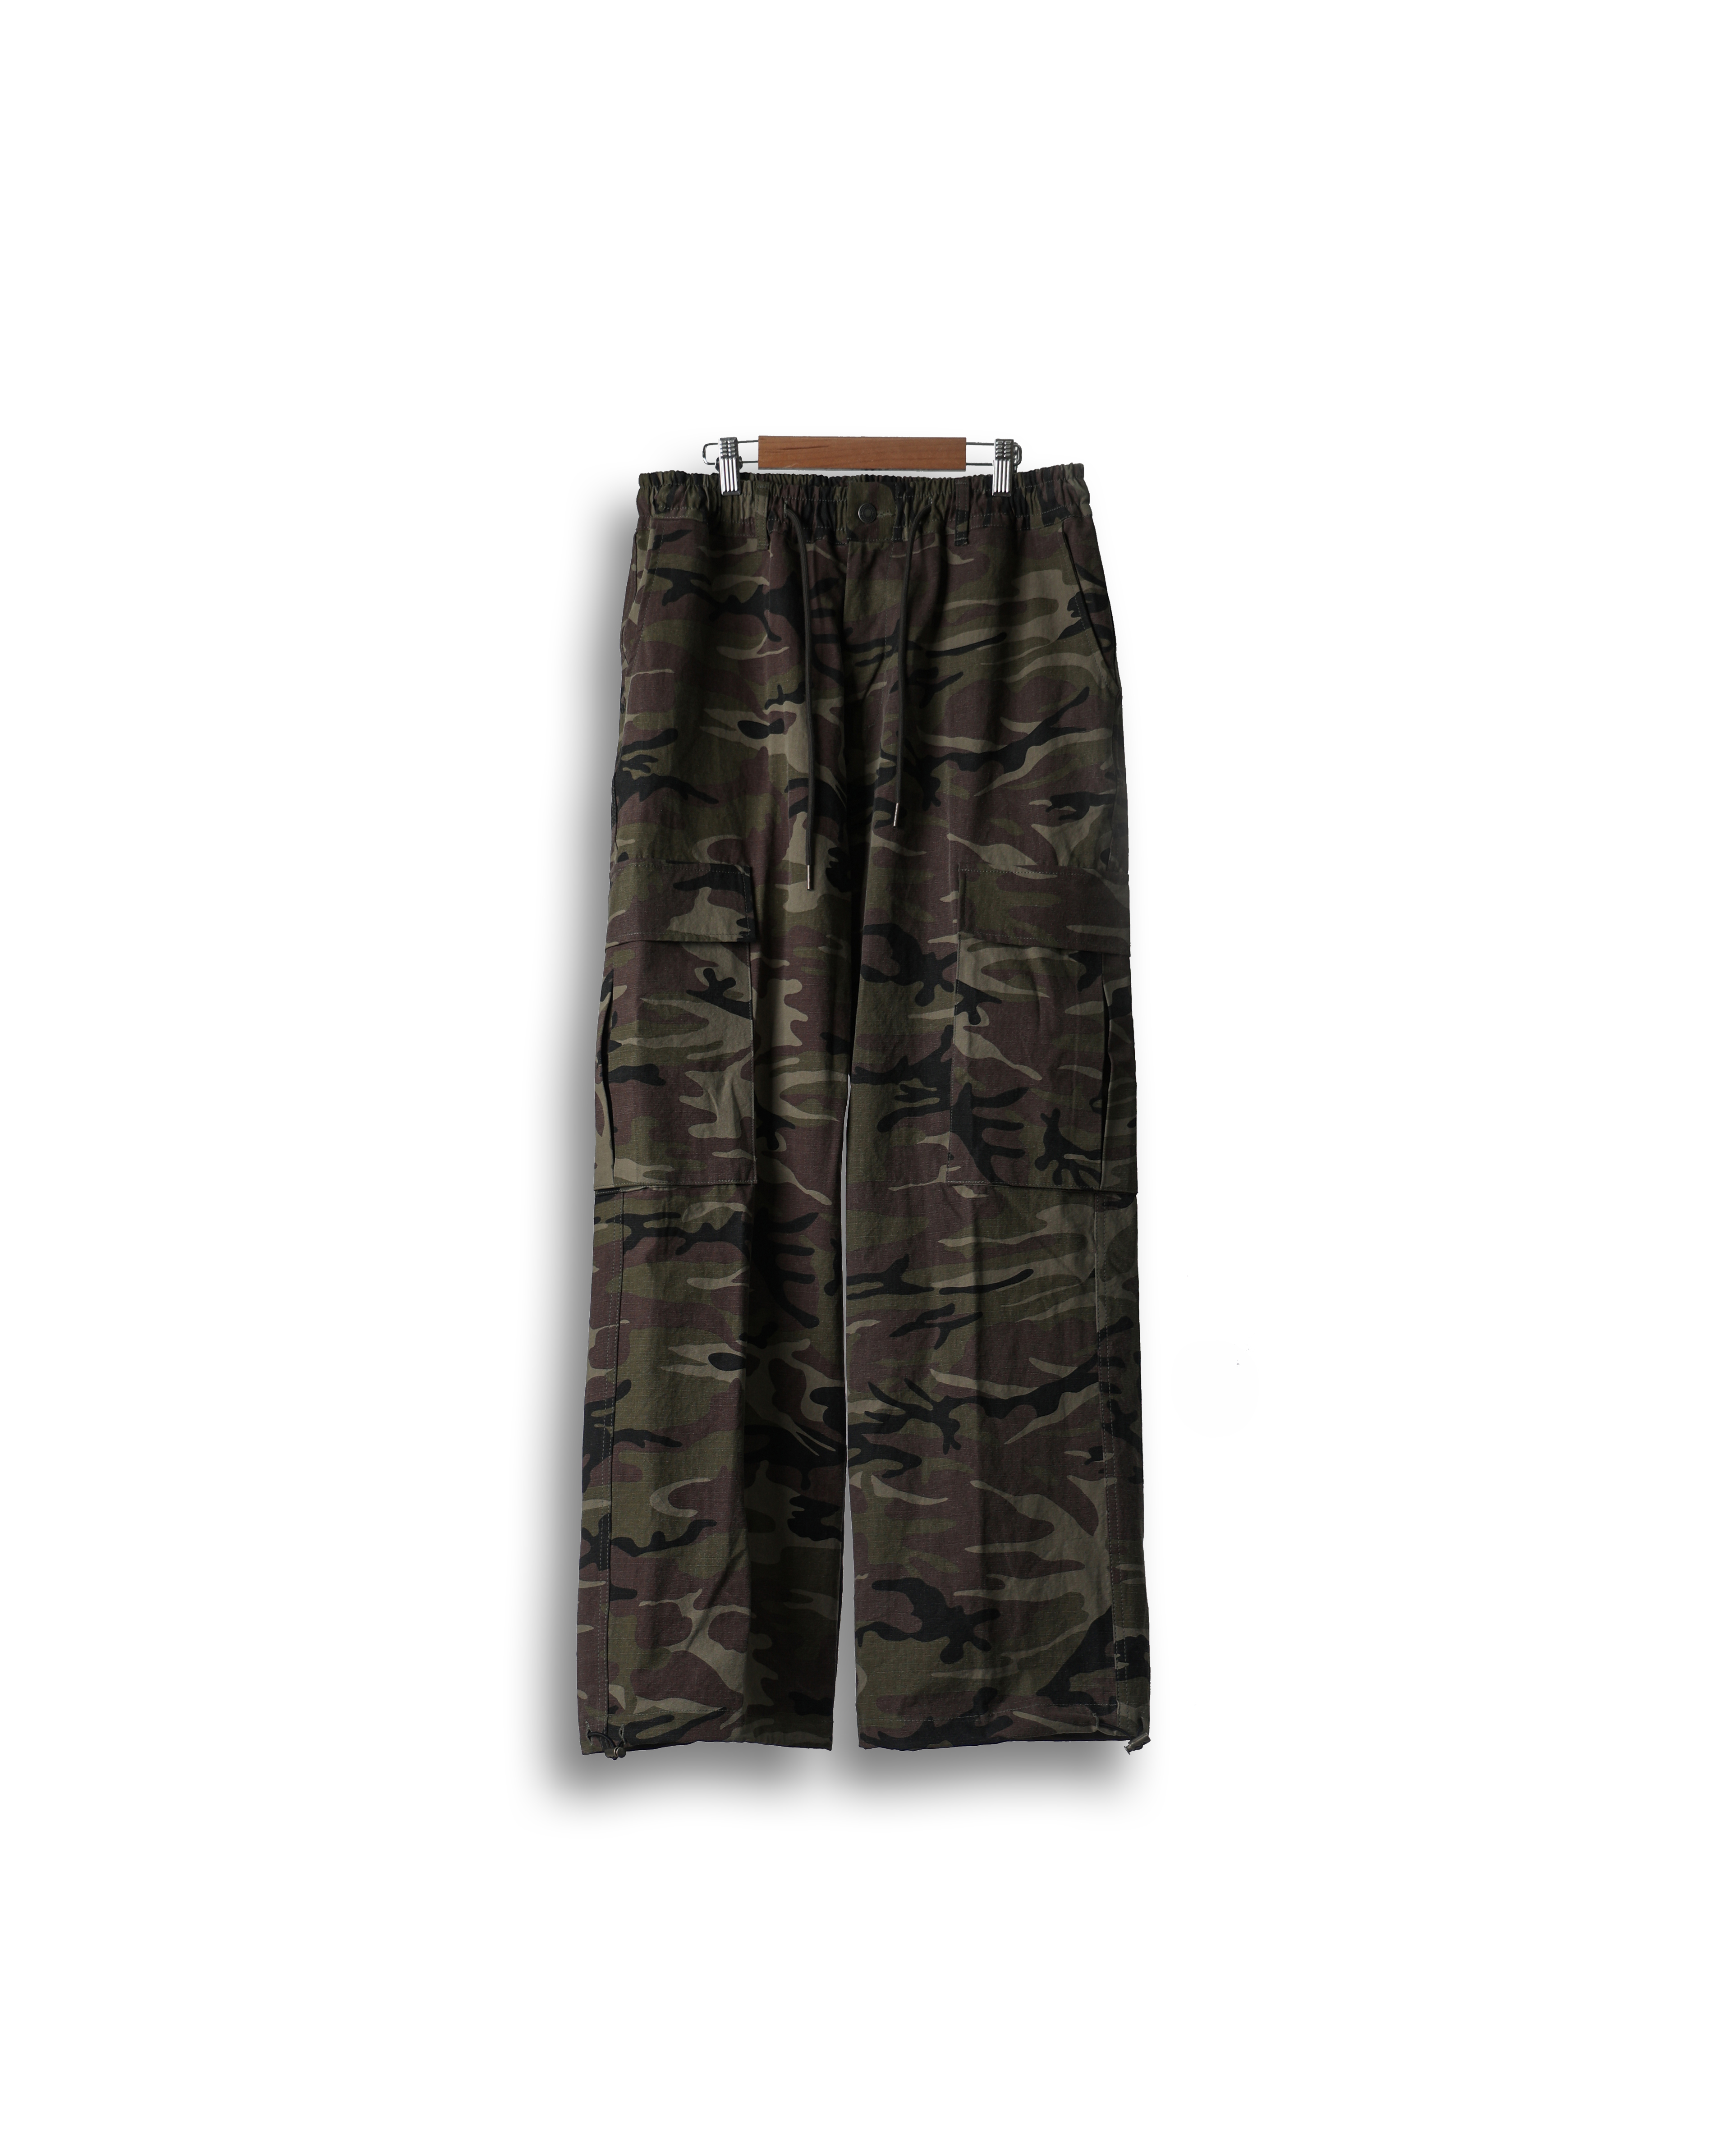 FITS 255 RIPSTOP Mil Cargo Pants (Camo)